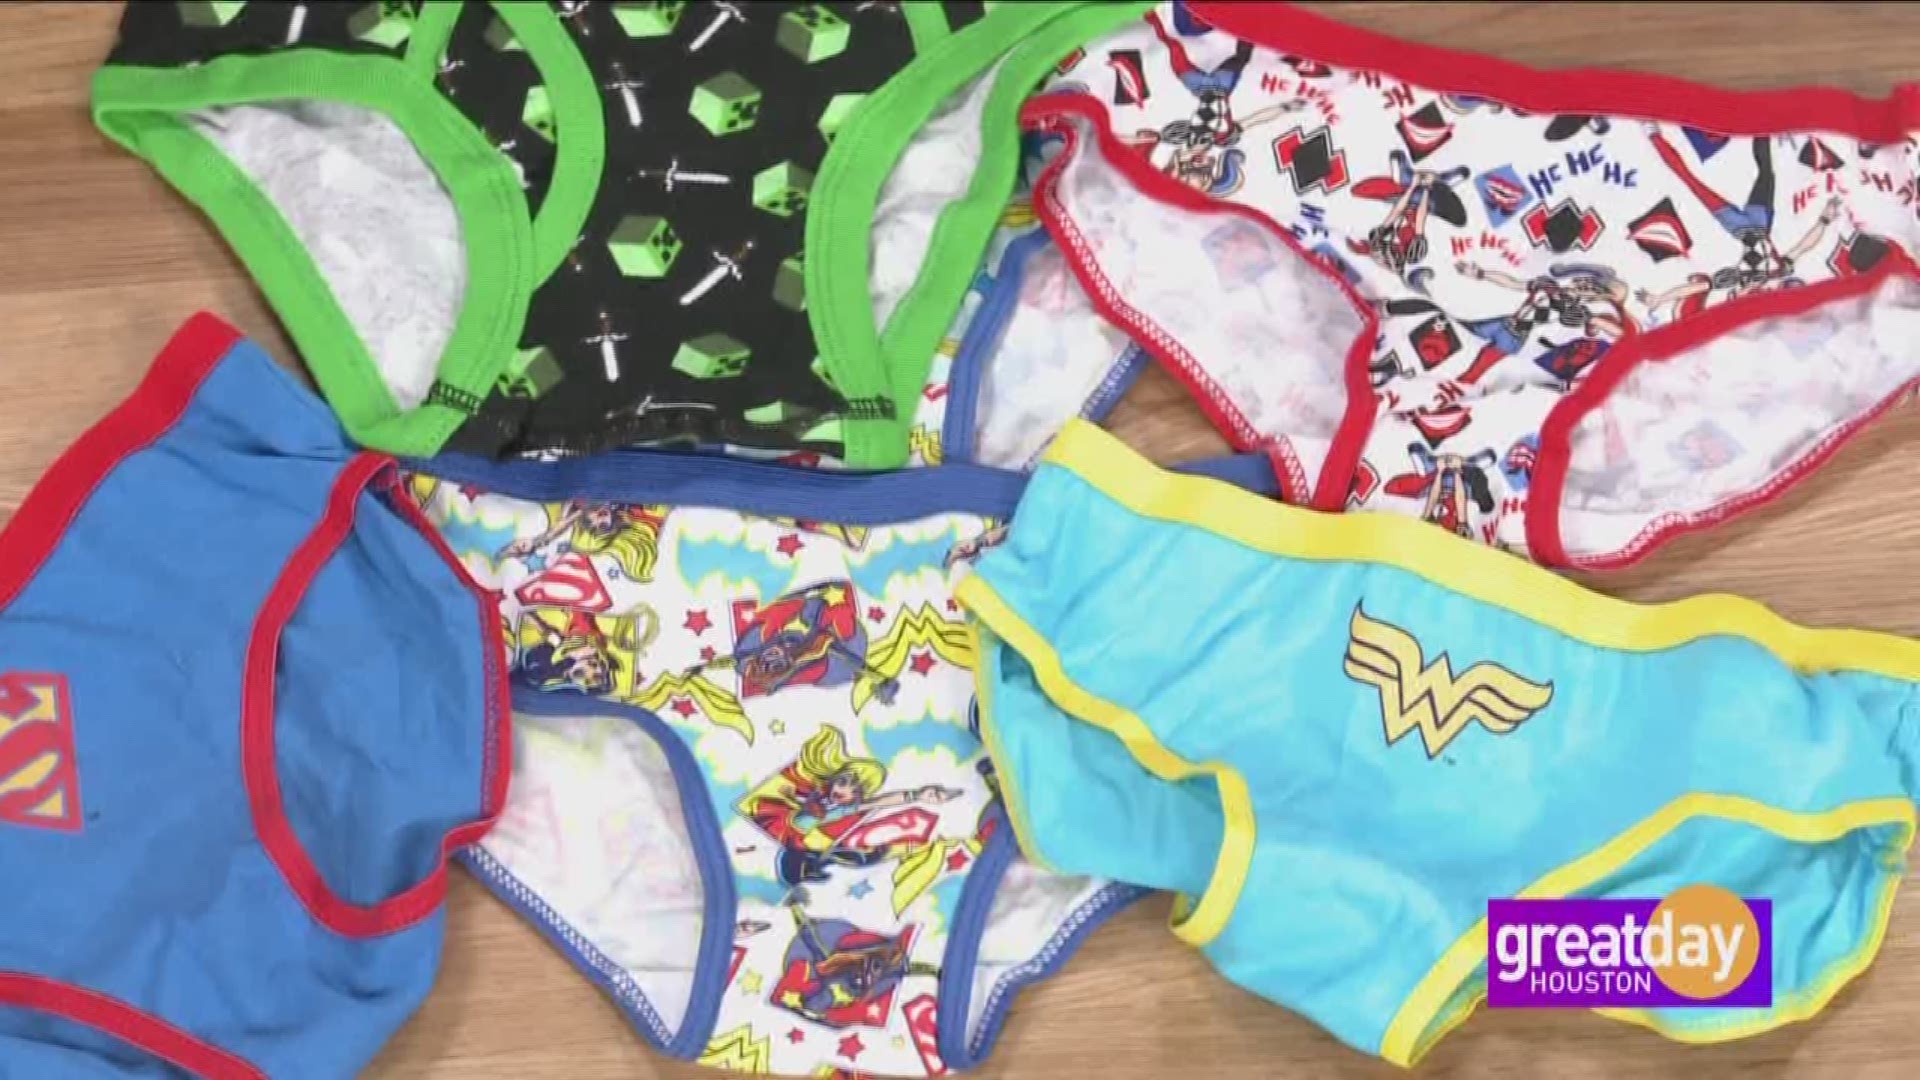 Amy Weiss shares how Undies for Everyone gives kids in need their dignity.